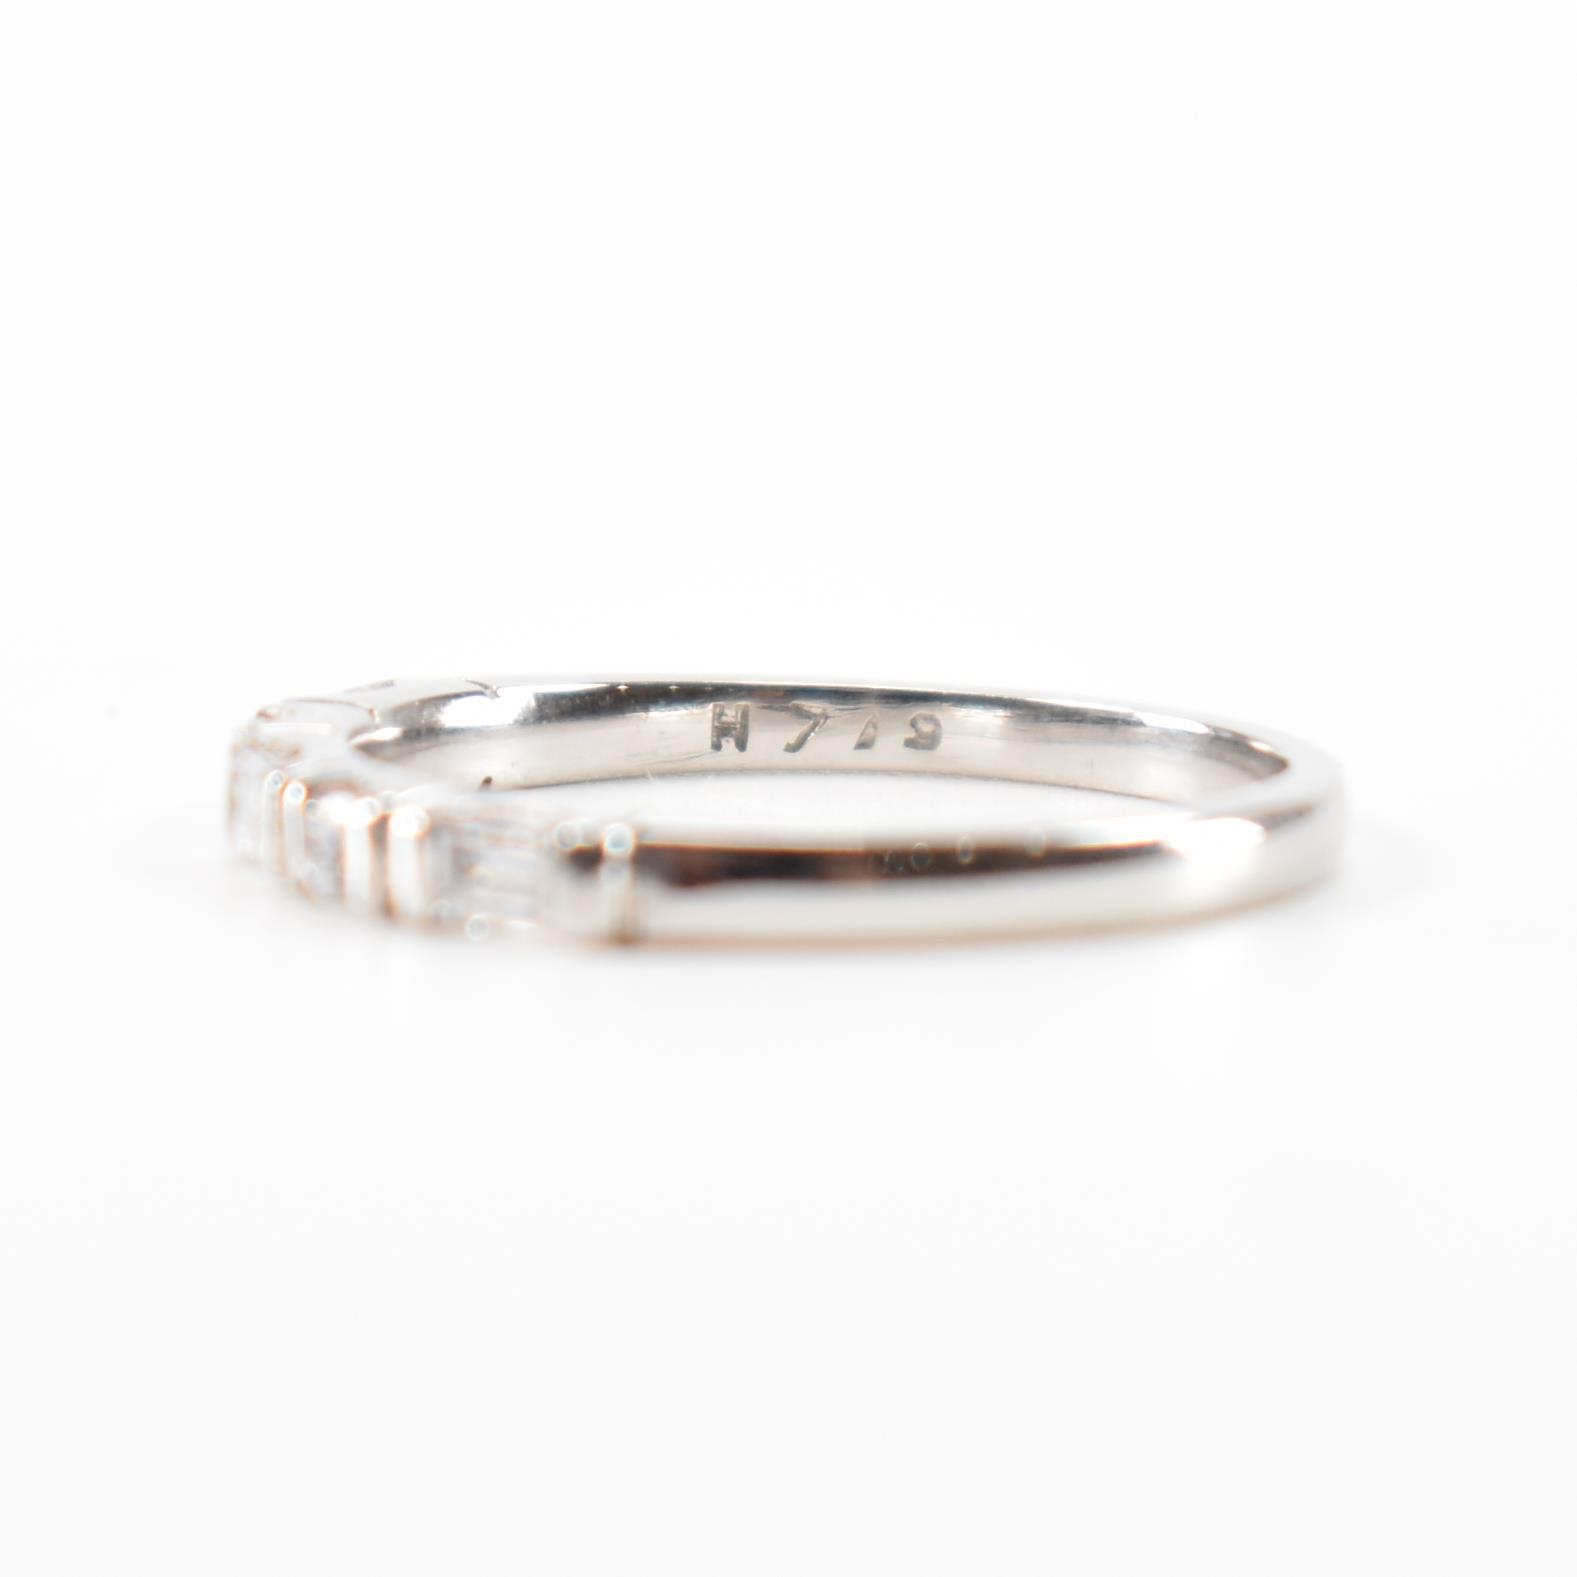 HALLMARKED 9CT WHITE GOLD & CZ ETERNITY RING - Image 5 of 8